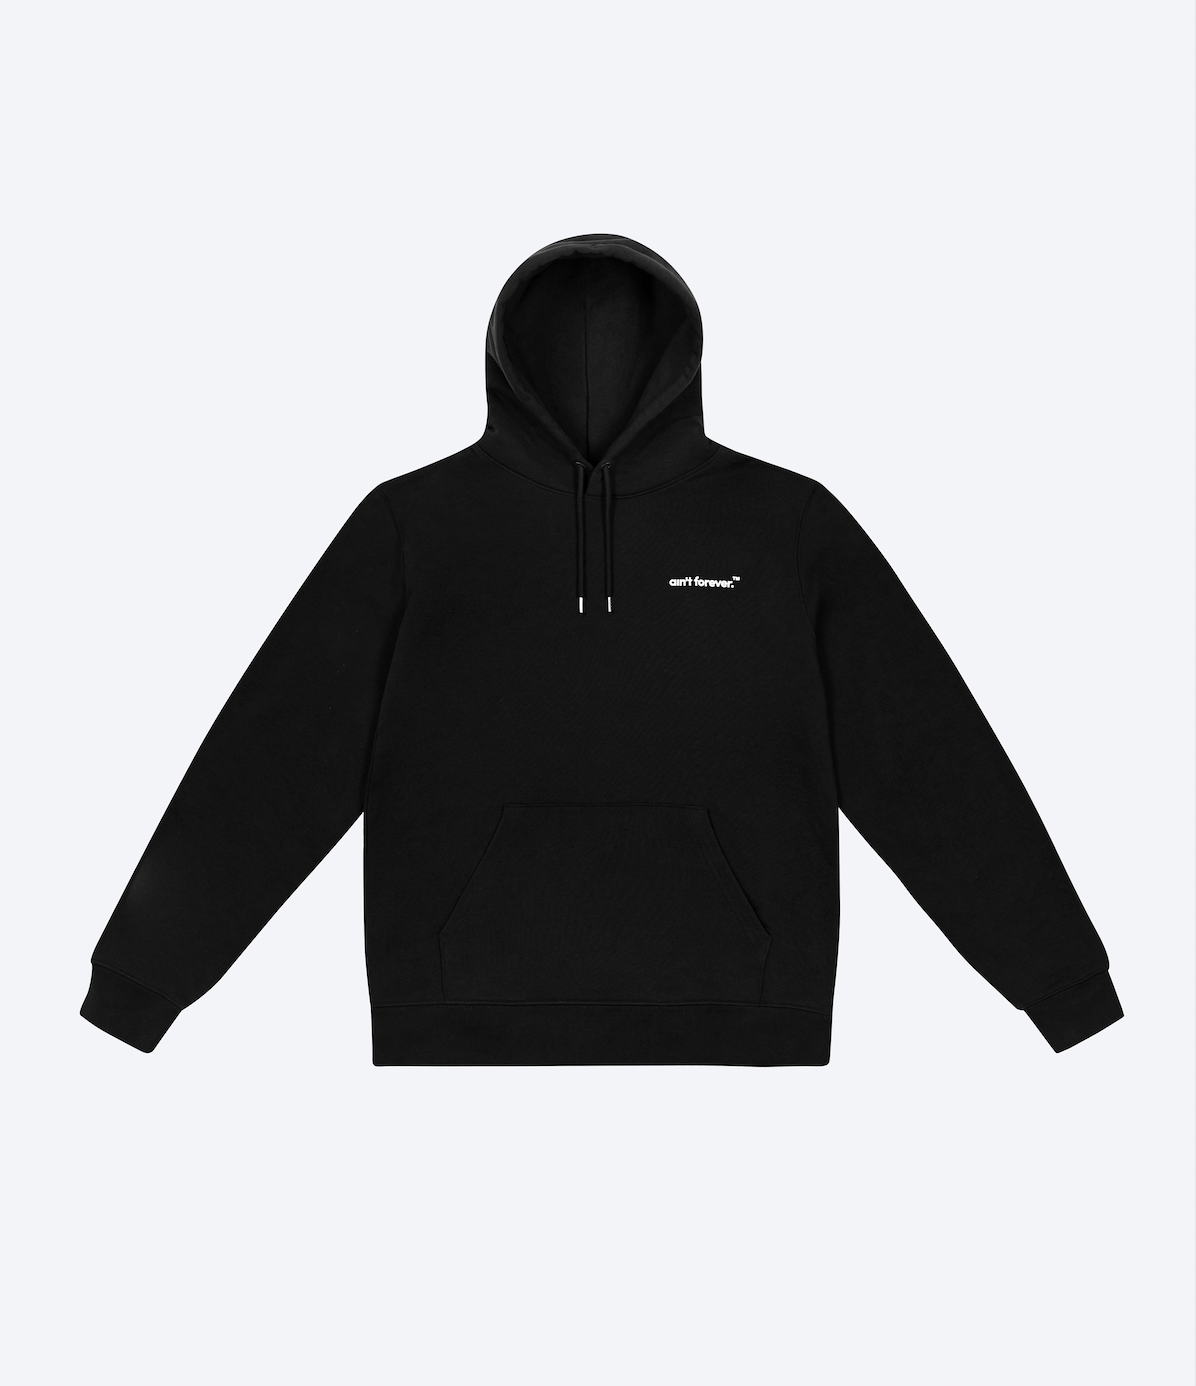 THE BOARDING PASS HOODIE (BLACK / RED)